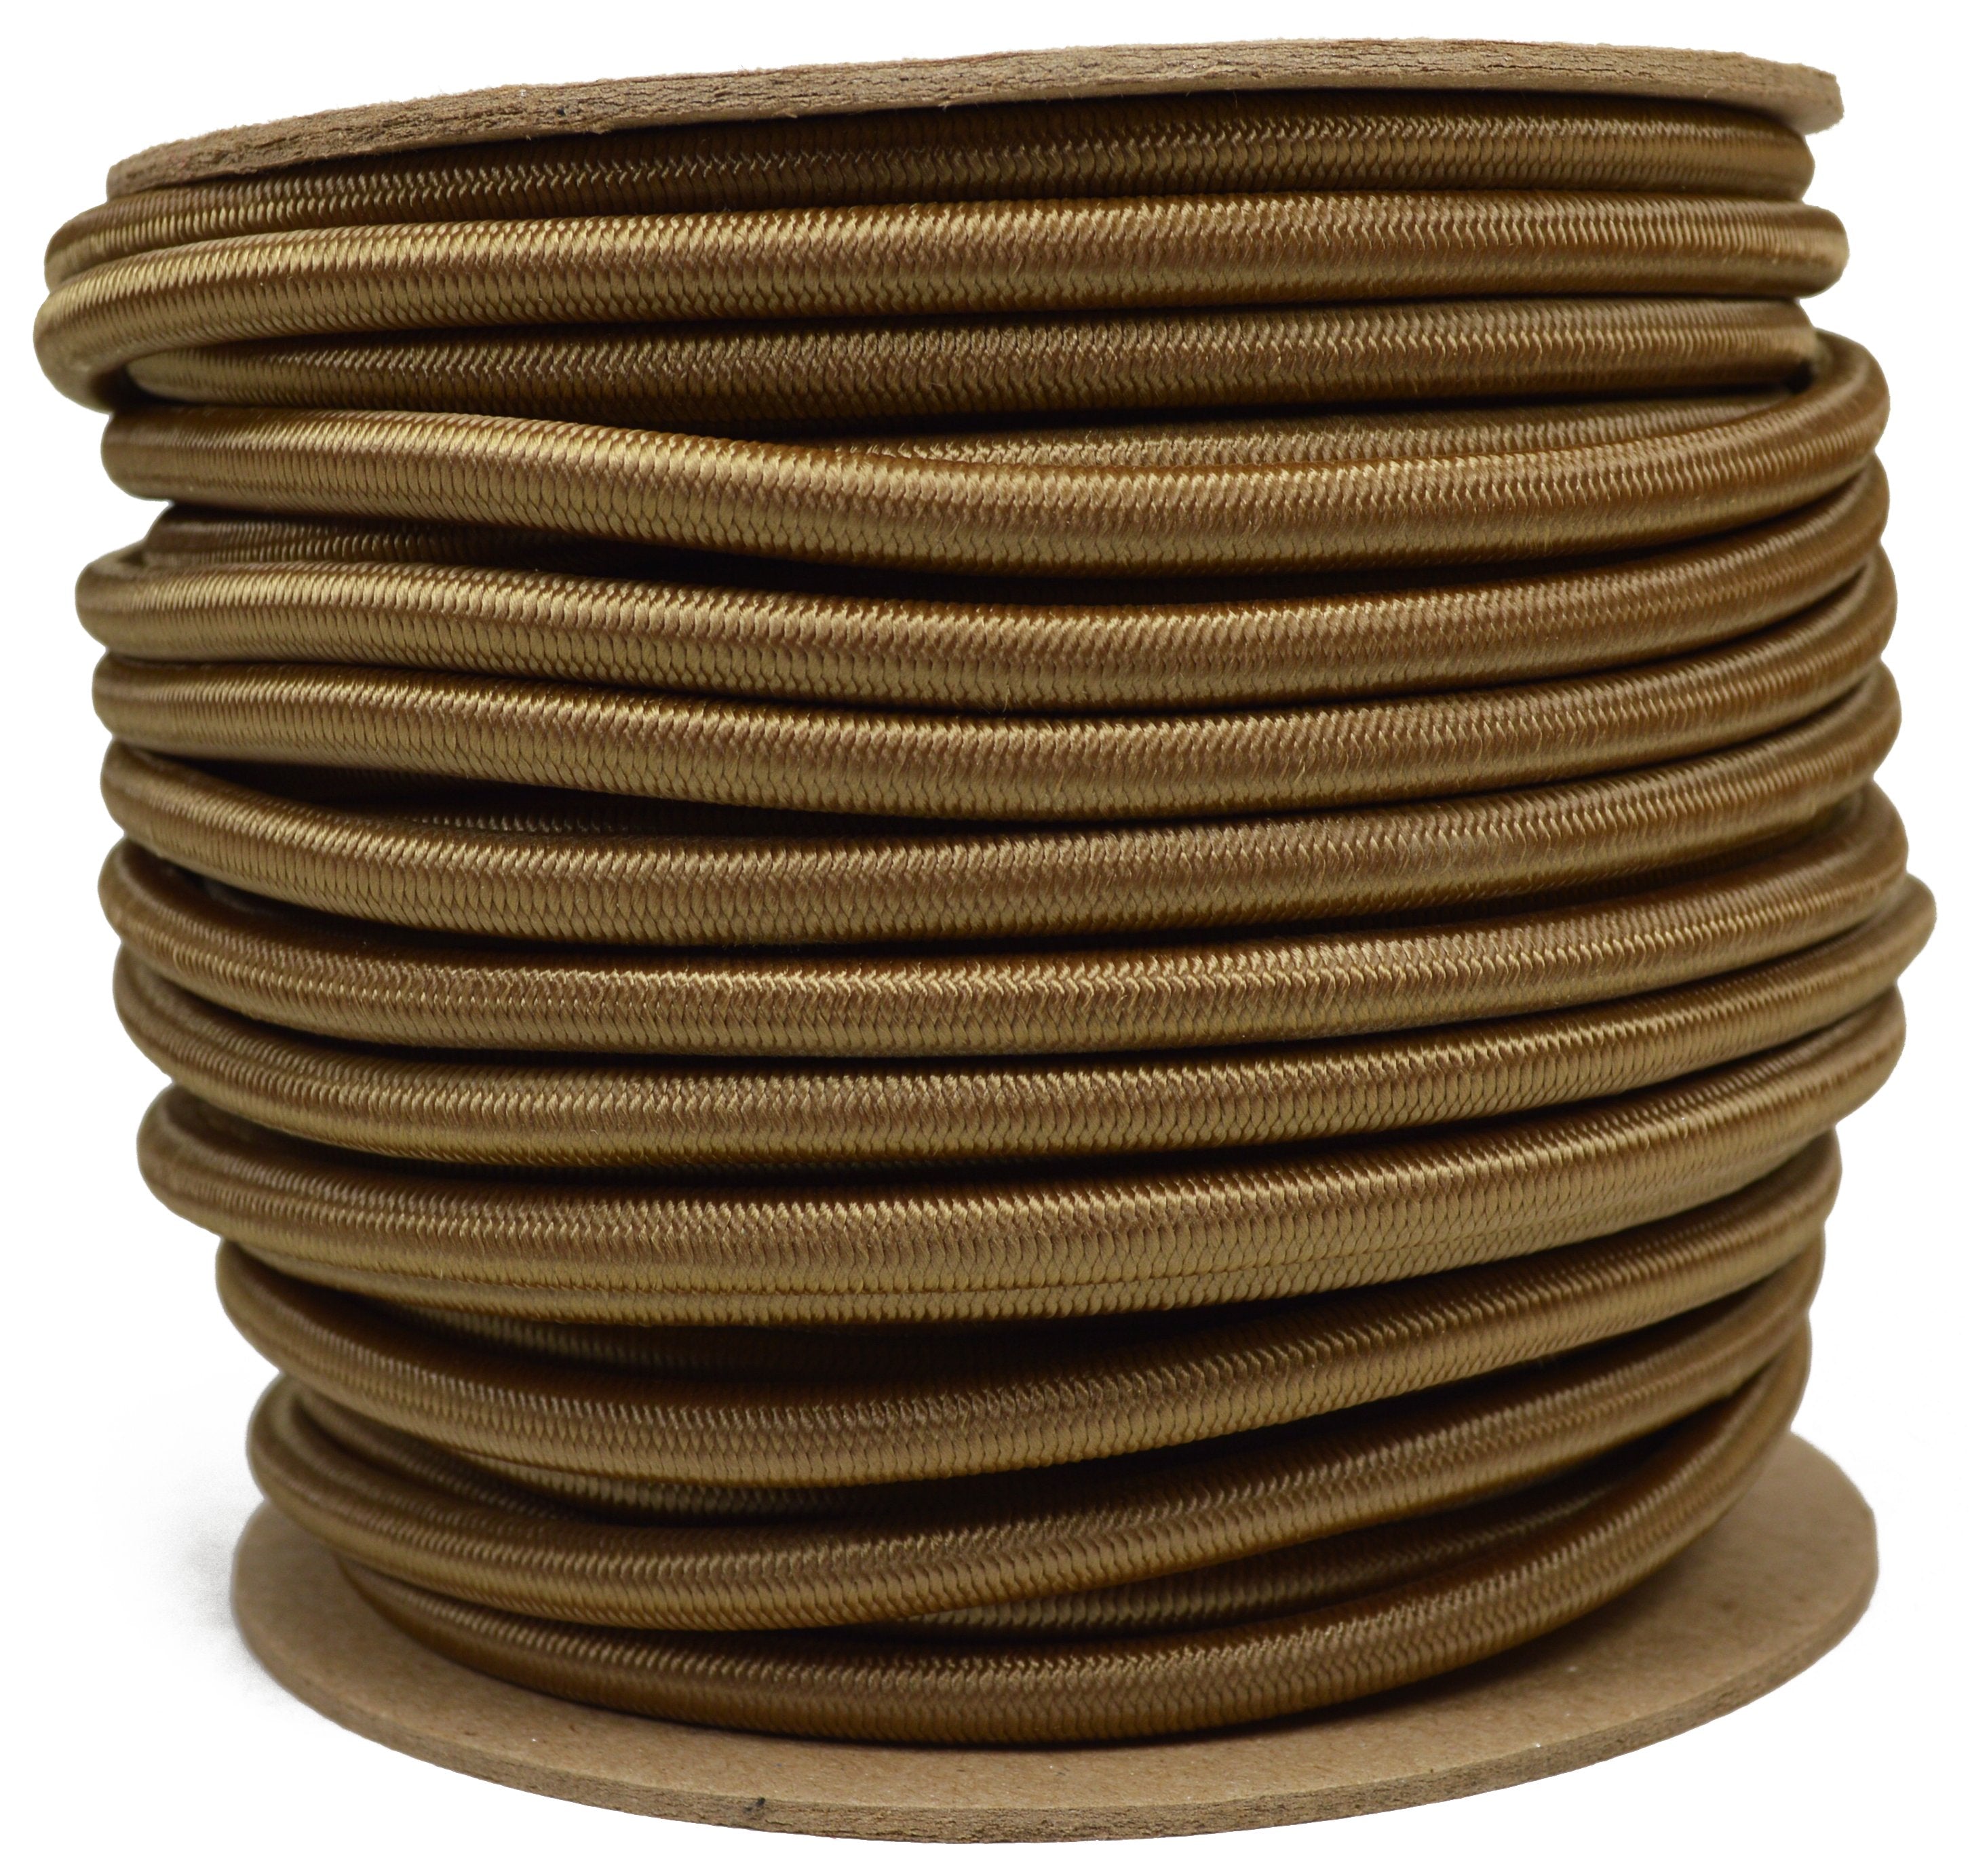 1/4 Shock Cord - Coyote Brown